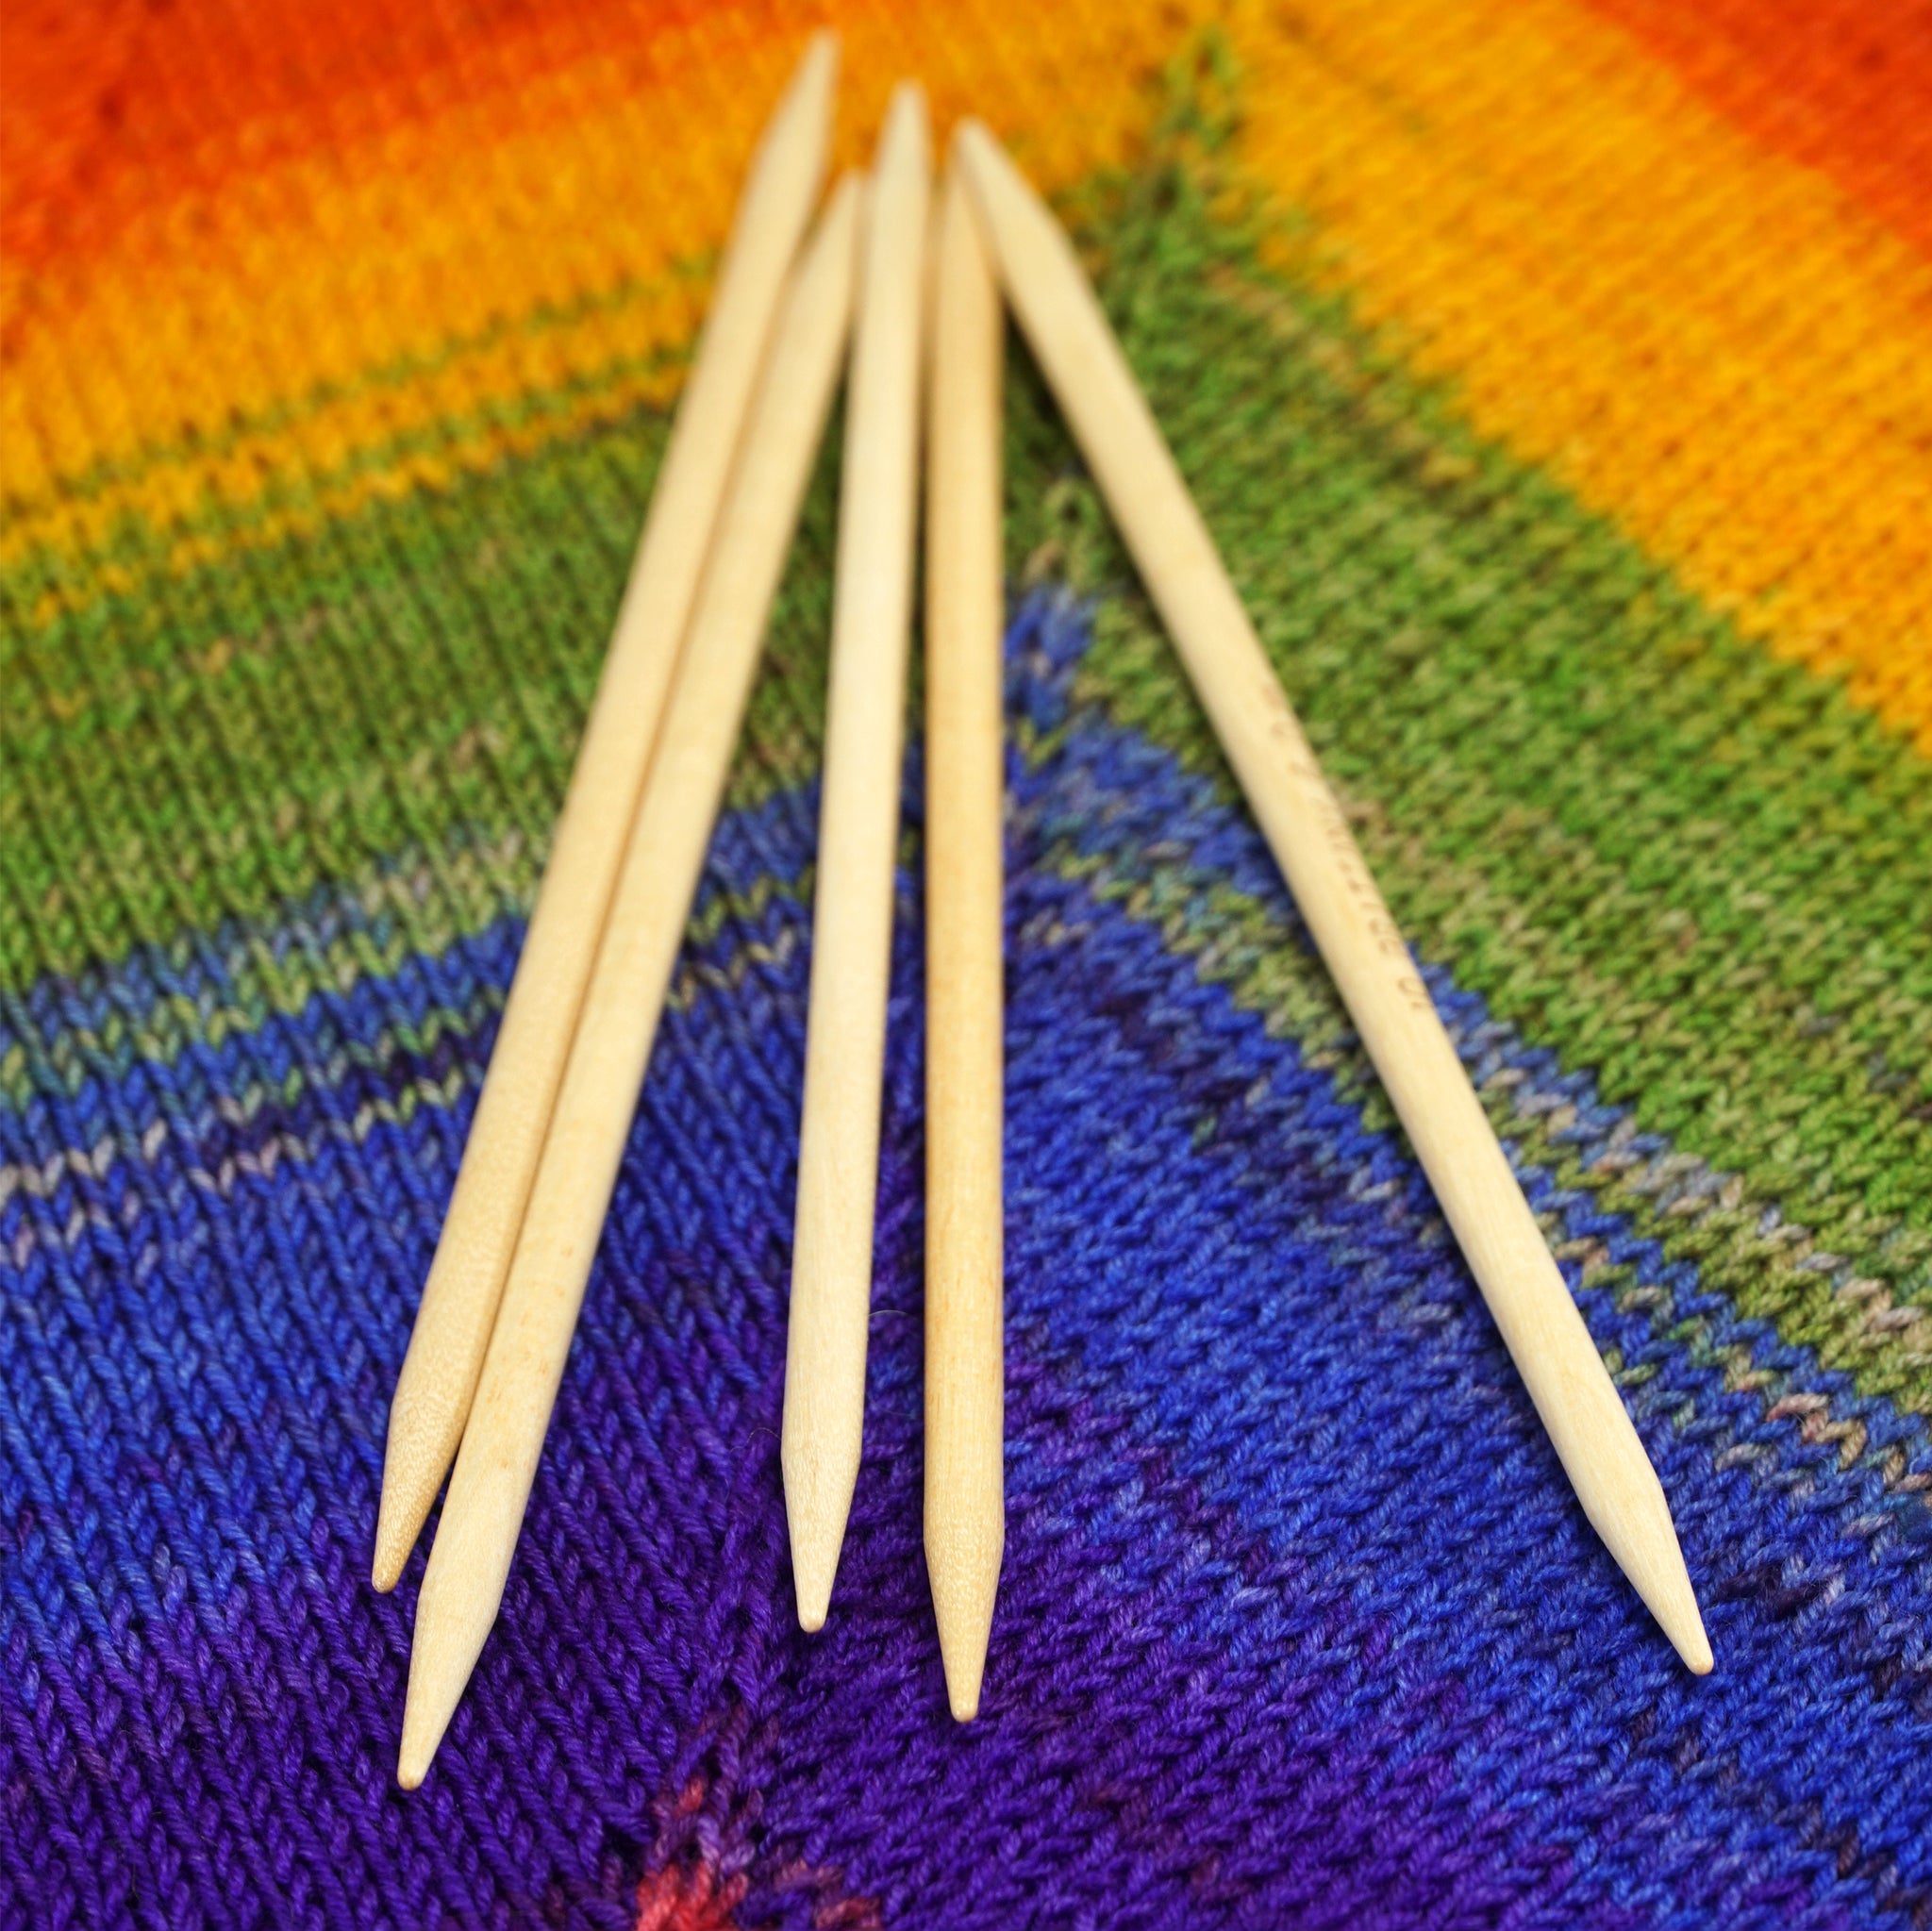 Brittany Single Point Knitting Needles 10 Size 9/5.5mm